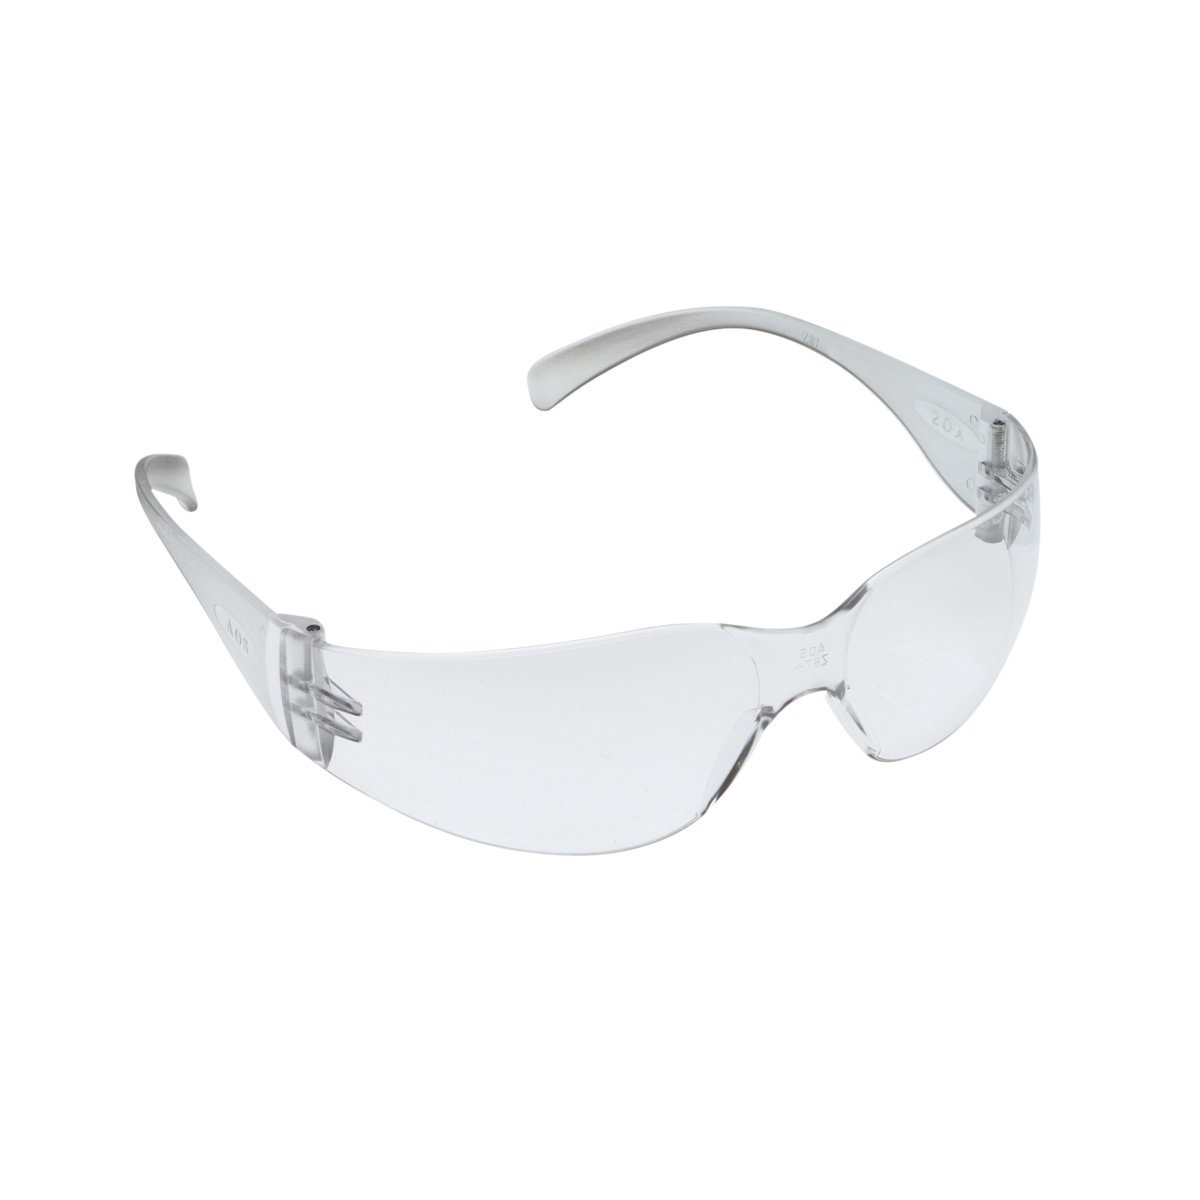 3M™ Virtua™ Protective Eyewear 11326-00000-100 Clear Temples Clear Hard Coat Lens (Availability restrictions apply.)